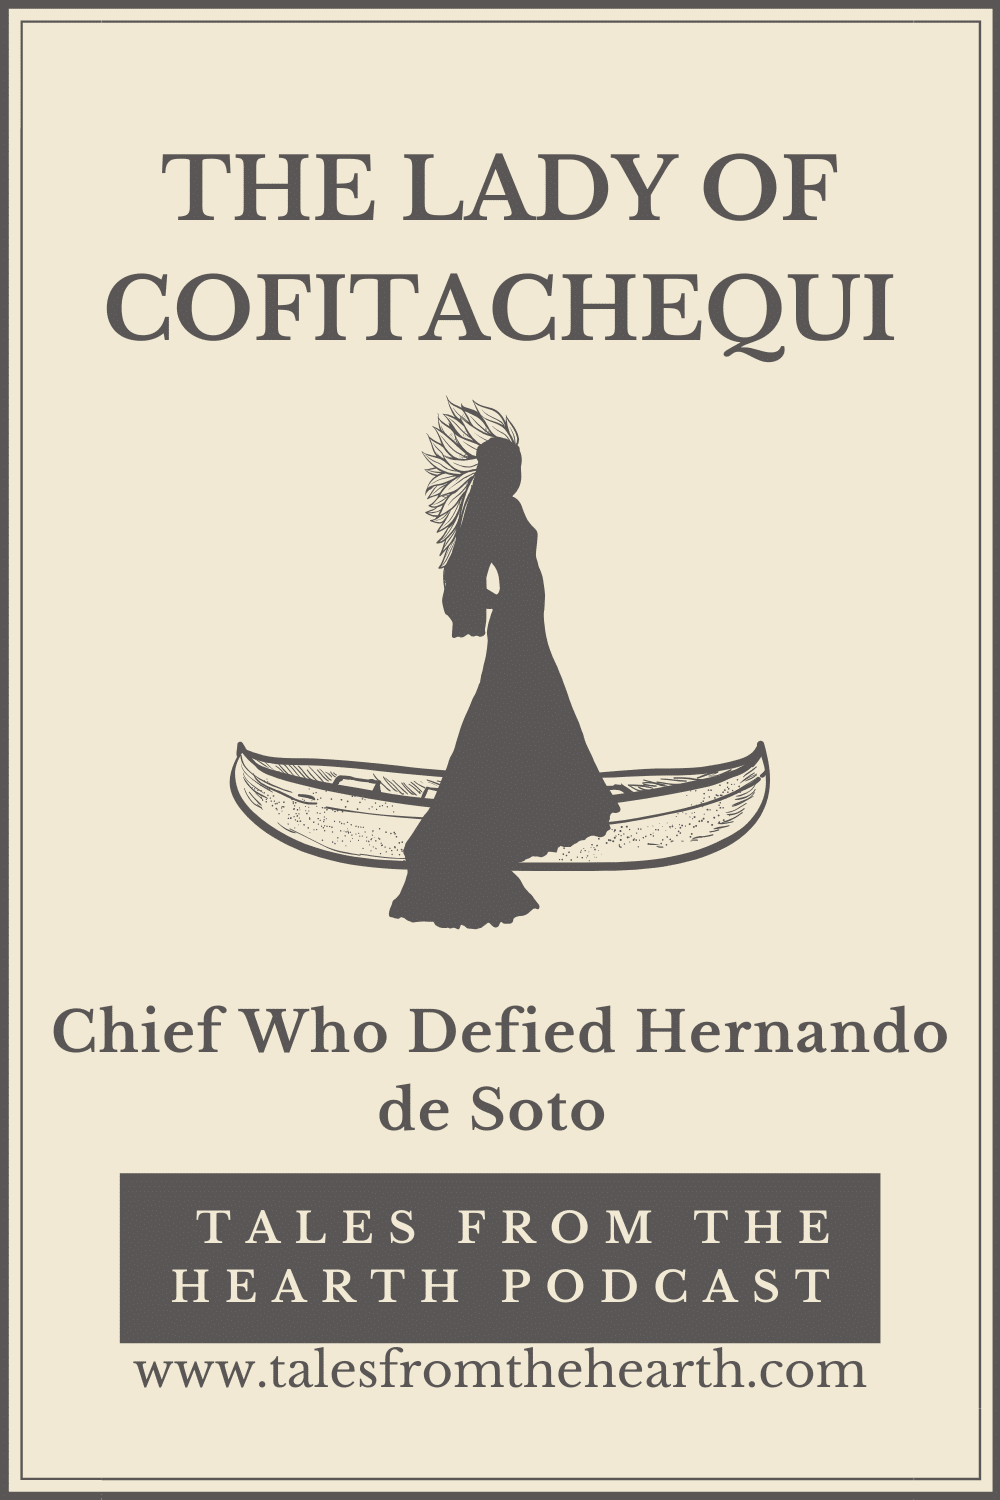 Did you hear about the female chief of the wealthy kingdom of Cofitachequi located in South Carolina? She defied Spanish conquistador Hernando de Soto as he tried to rip apart her kingdom in search of riches. Join us for today’s episode on the Lady Chief of Cofitachequi